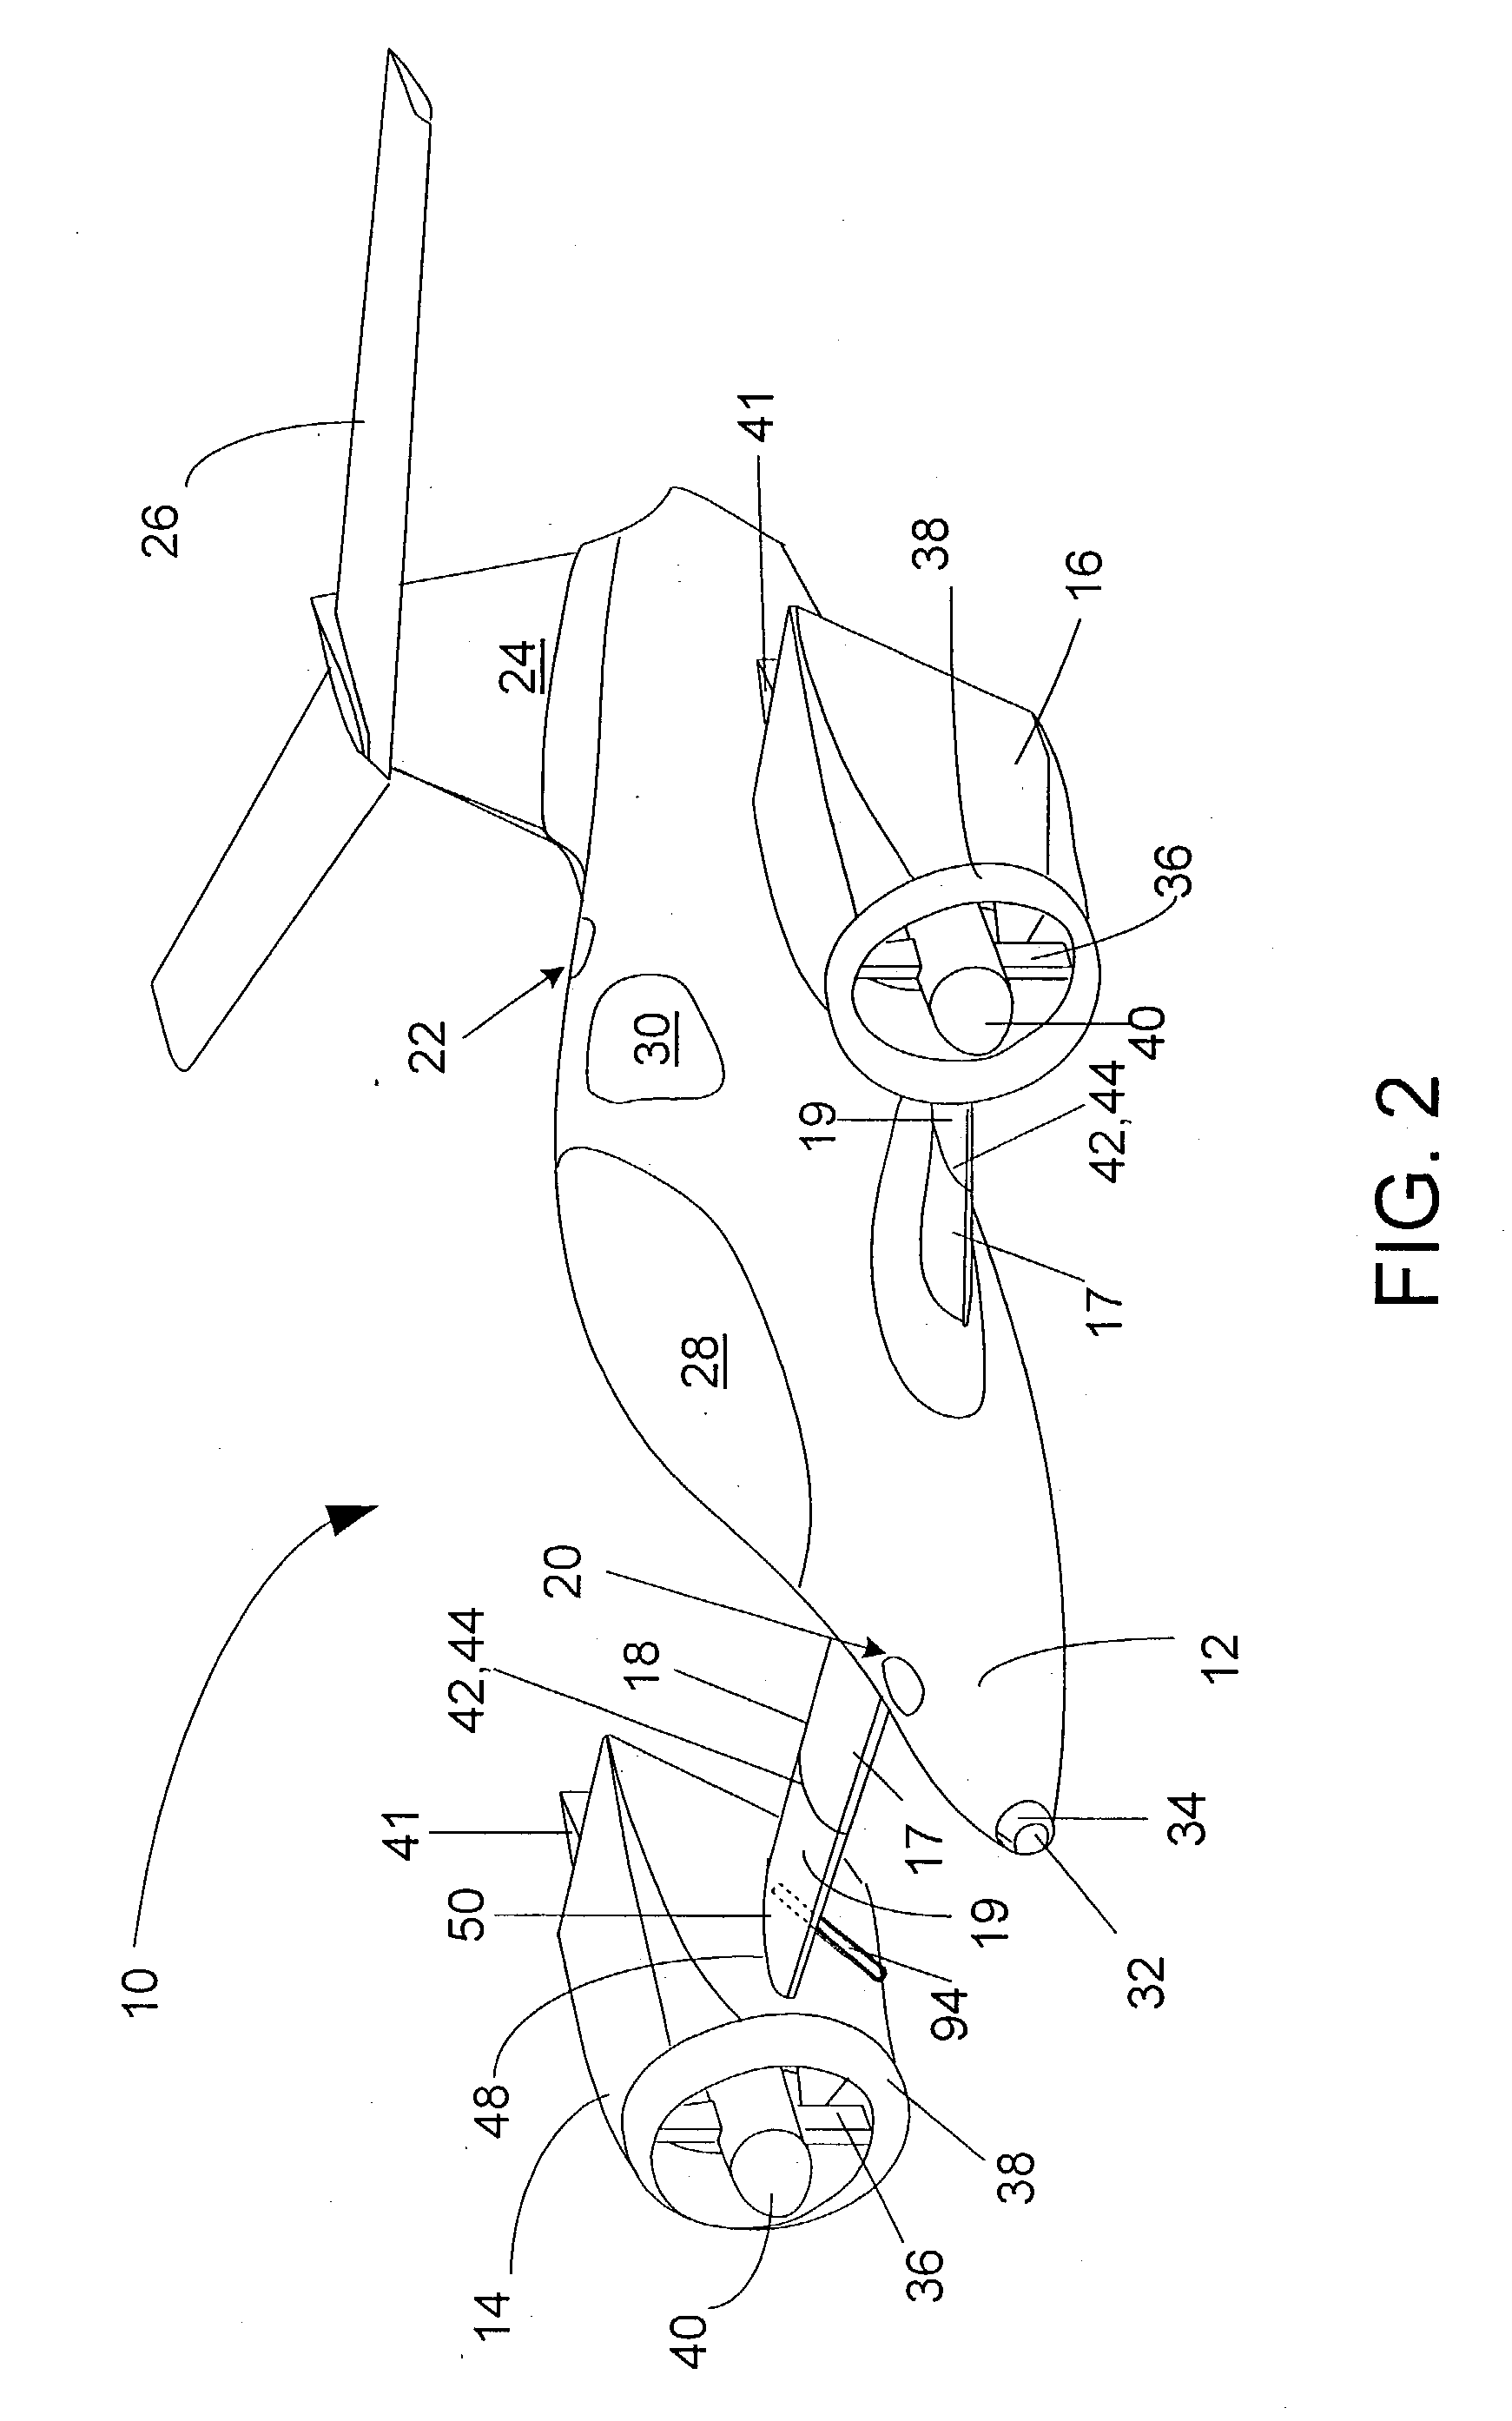 Vertical take-off and landing vehicles